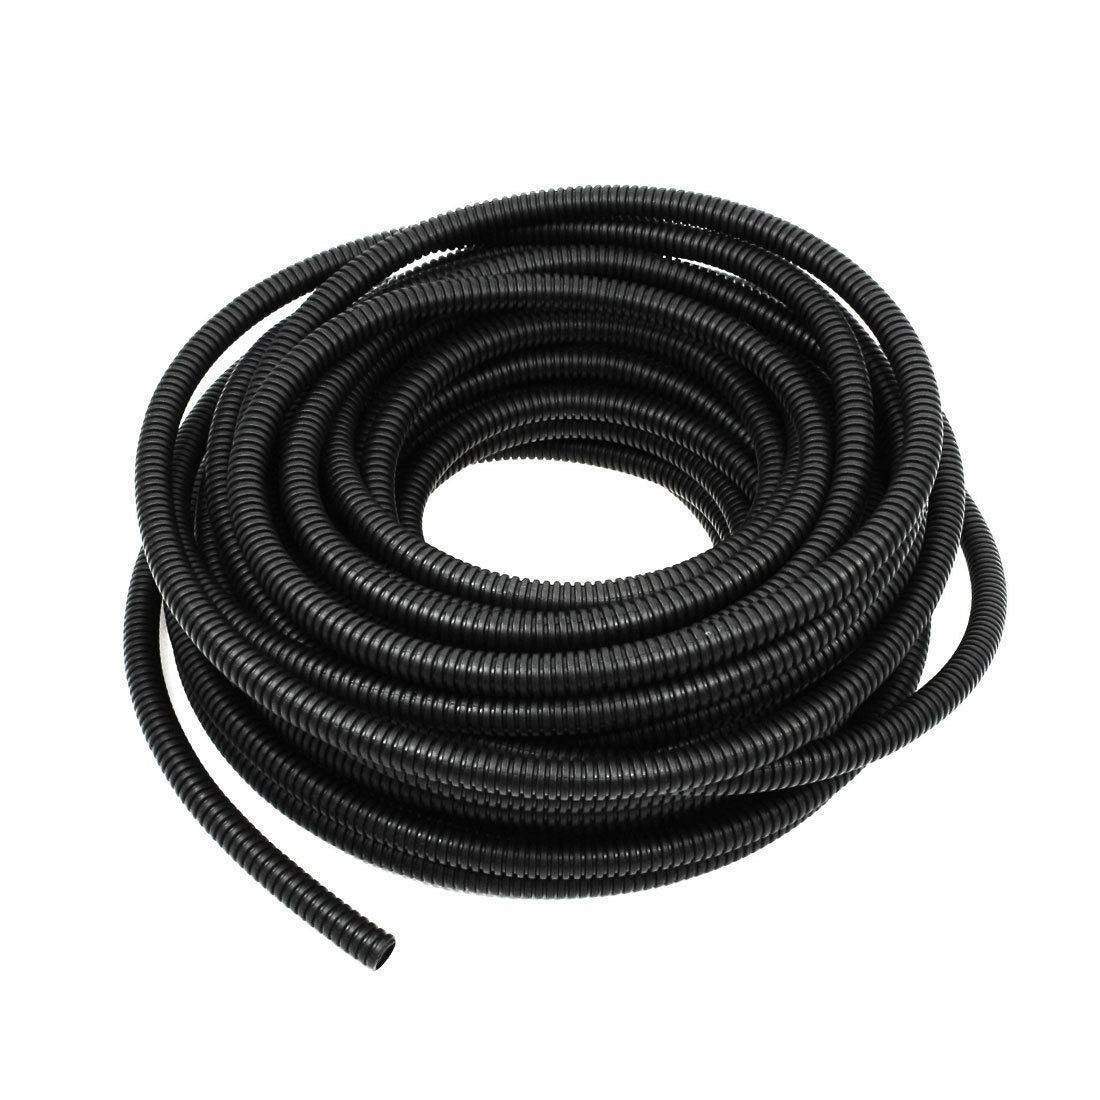 American Terminal 27100 1" Black Split-Loom Cable Tubing for Various Automotive, Home, Marine, Industrial Wiring Applications, Etc.